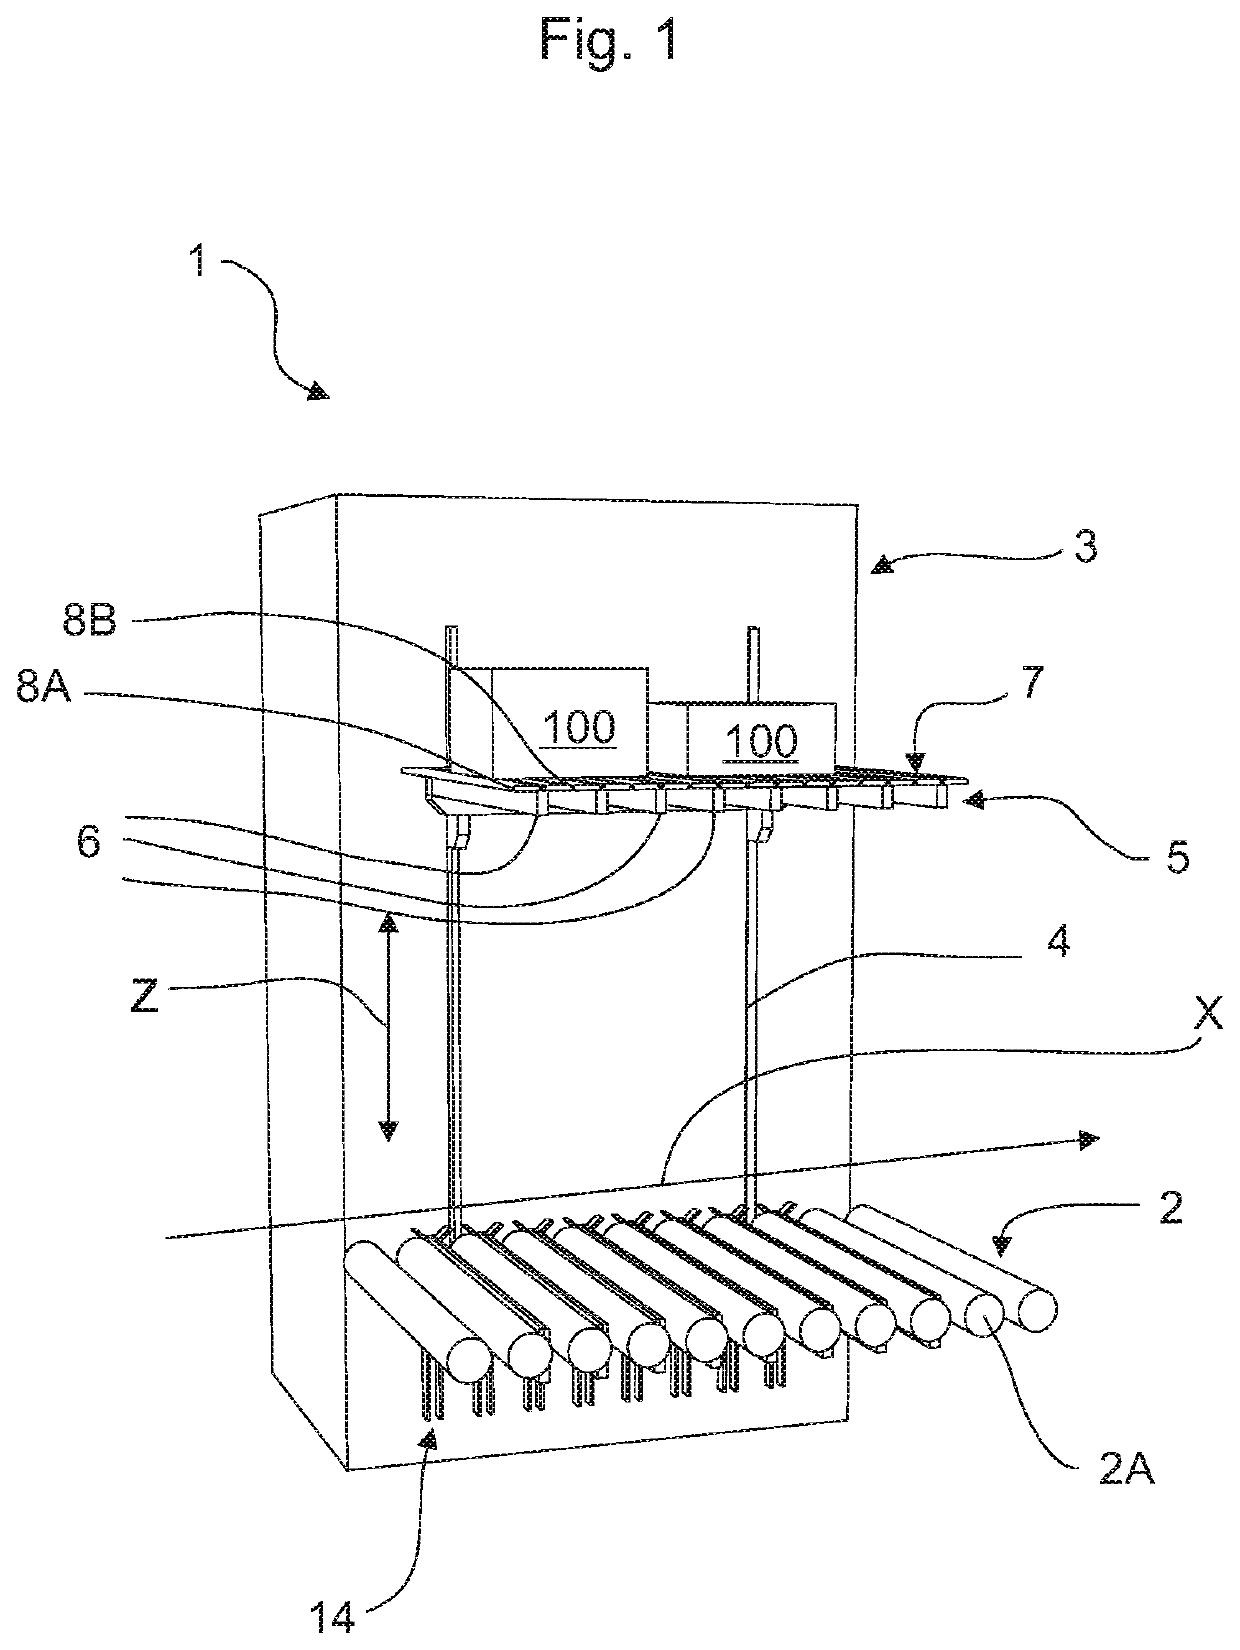 Device for lifting one or a plurality of articles from a roller conveyor